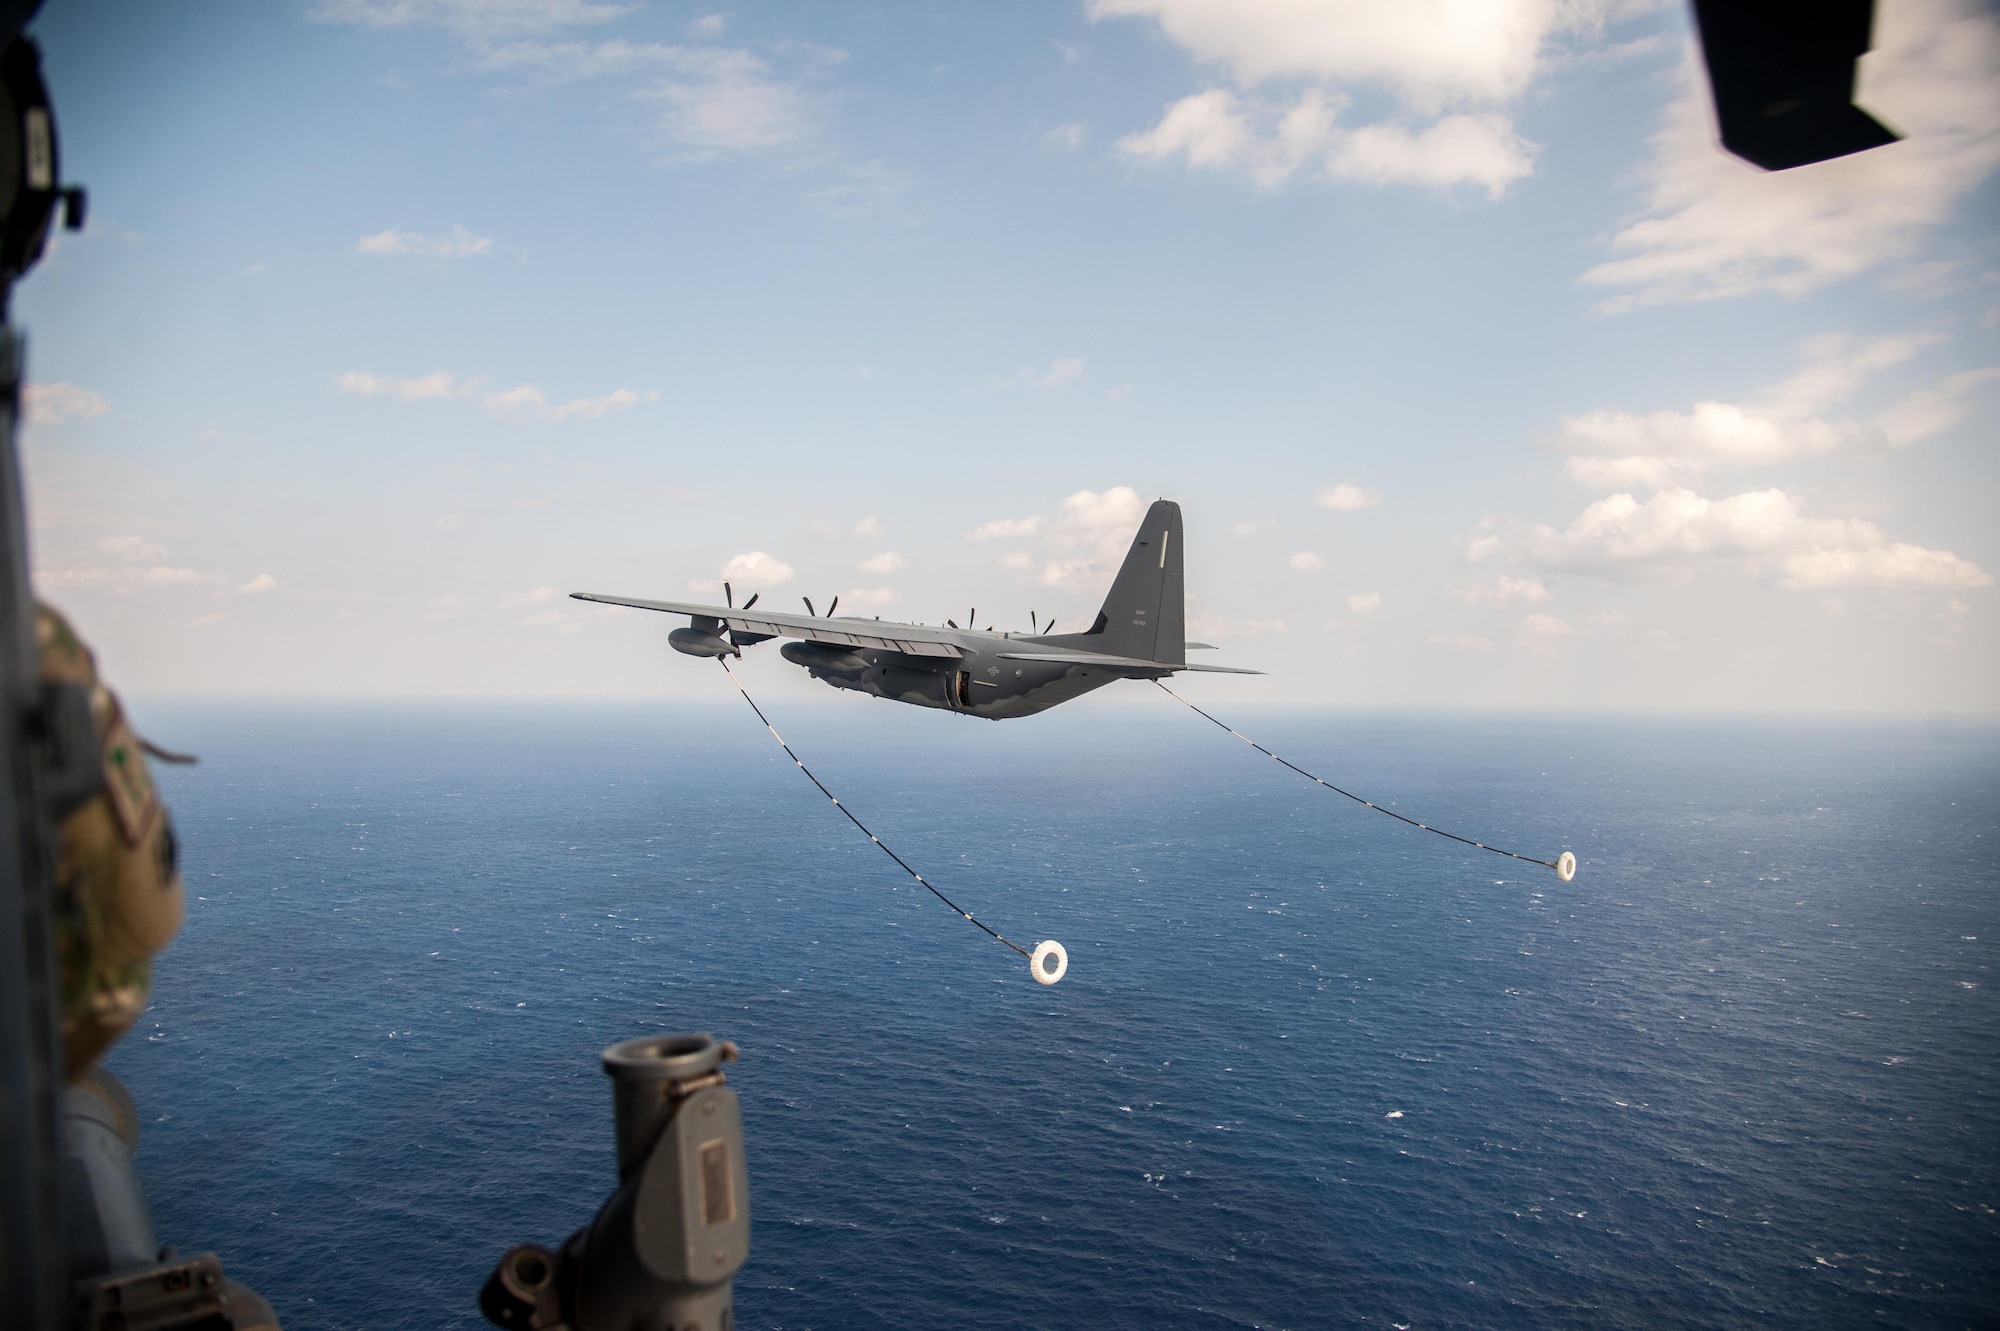 A U.S. Air Force MC-130J Commando II from the 17th Special Operations Squadron prepares to perform in-flight refueling with a HH-60G Pave Hawk helicopter assigned to the 33rd Rescue Squadron Nov. 4, 2016, off the coast of Okinawa, Japan. Keen Sword is a regularly scheduled exercise which strengthens Japan-U.S. military interoperability and meets mutual defense objectives. Japan-U.S. military operations and exercises increase readiness to respond to varied crisis situations in the region. (U.S. Air Force photo by Senior Airman John Linzmeier)